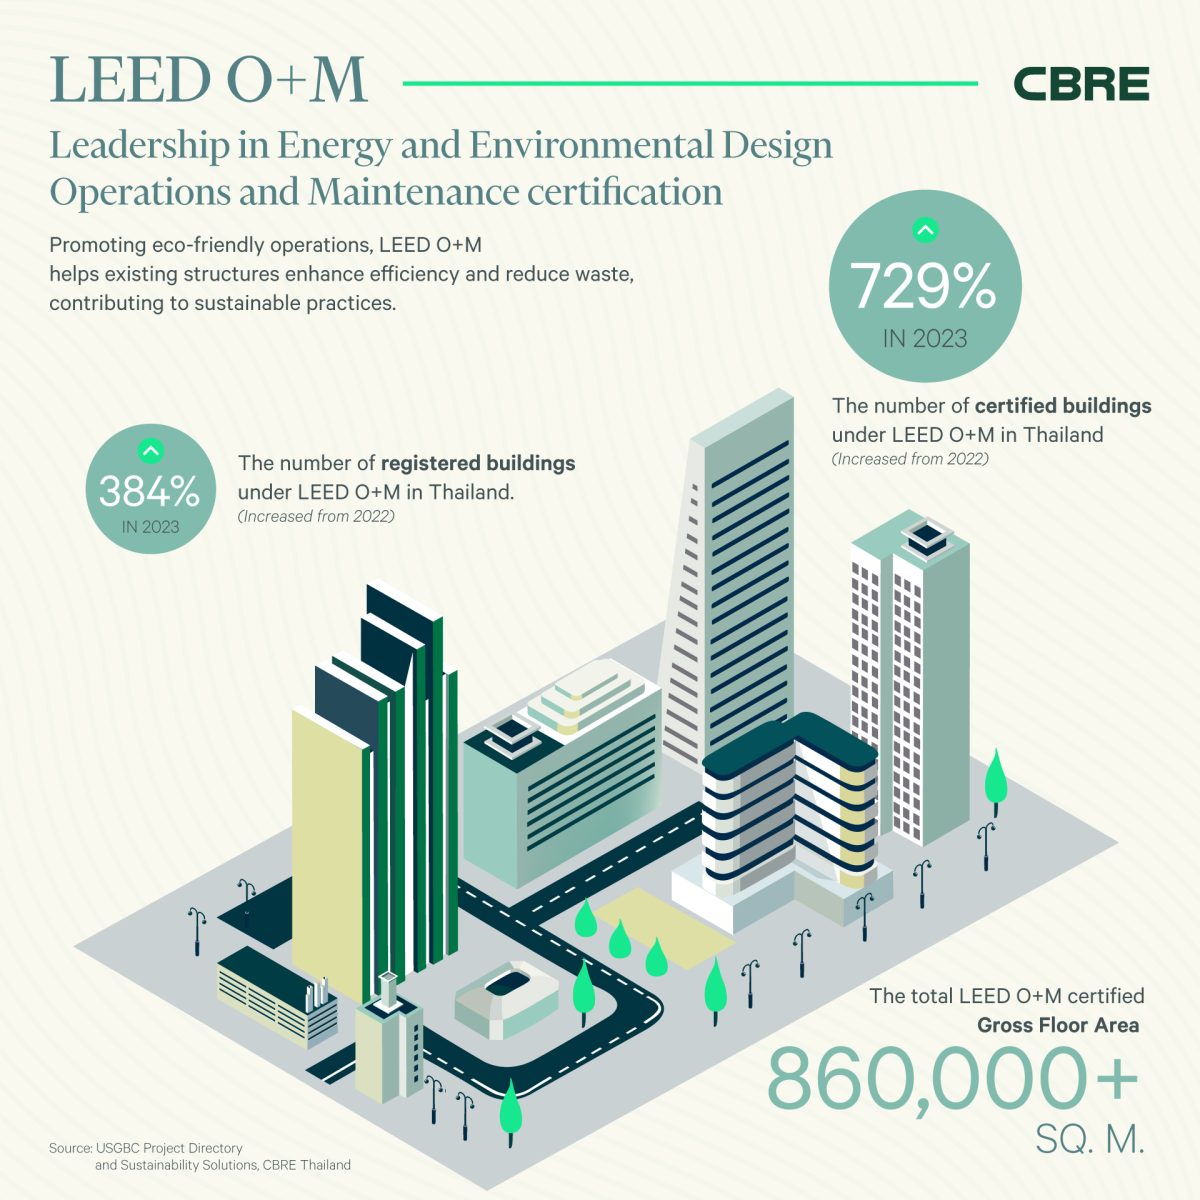 CBRE Thailand Contributes to Sustainability Efforts, Transforming Old Buildings with Latest Trends